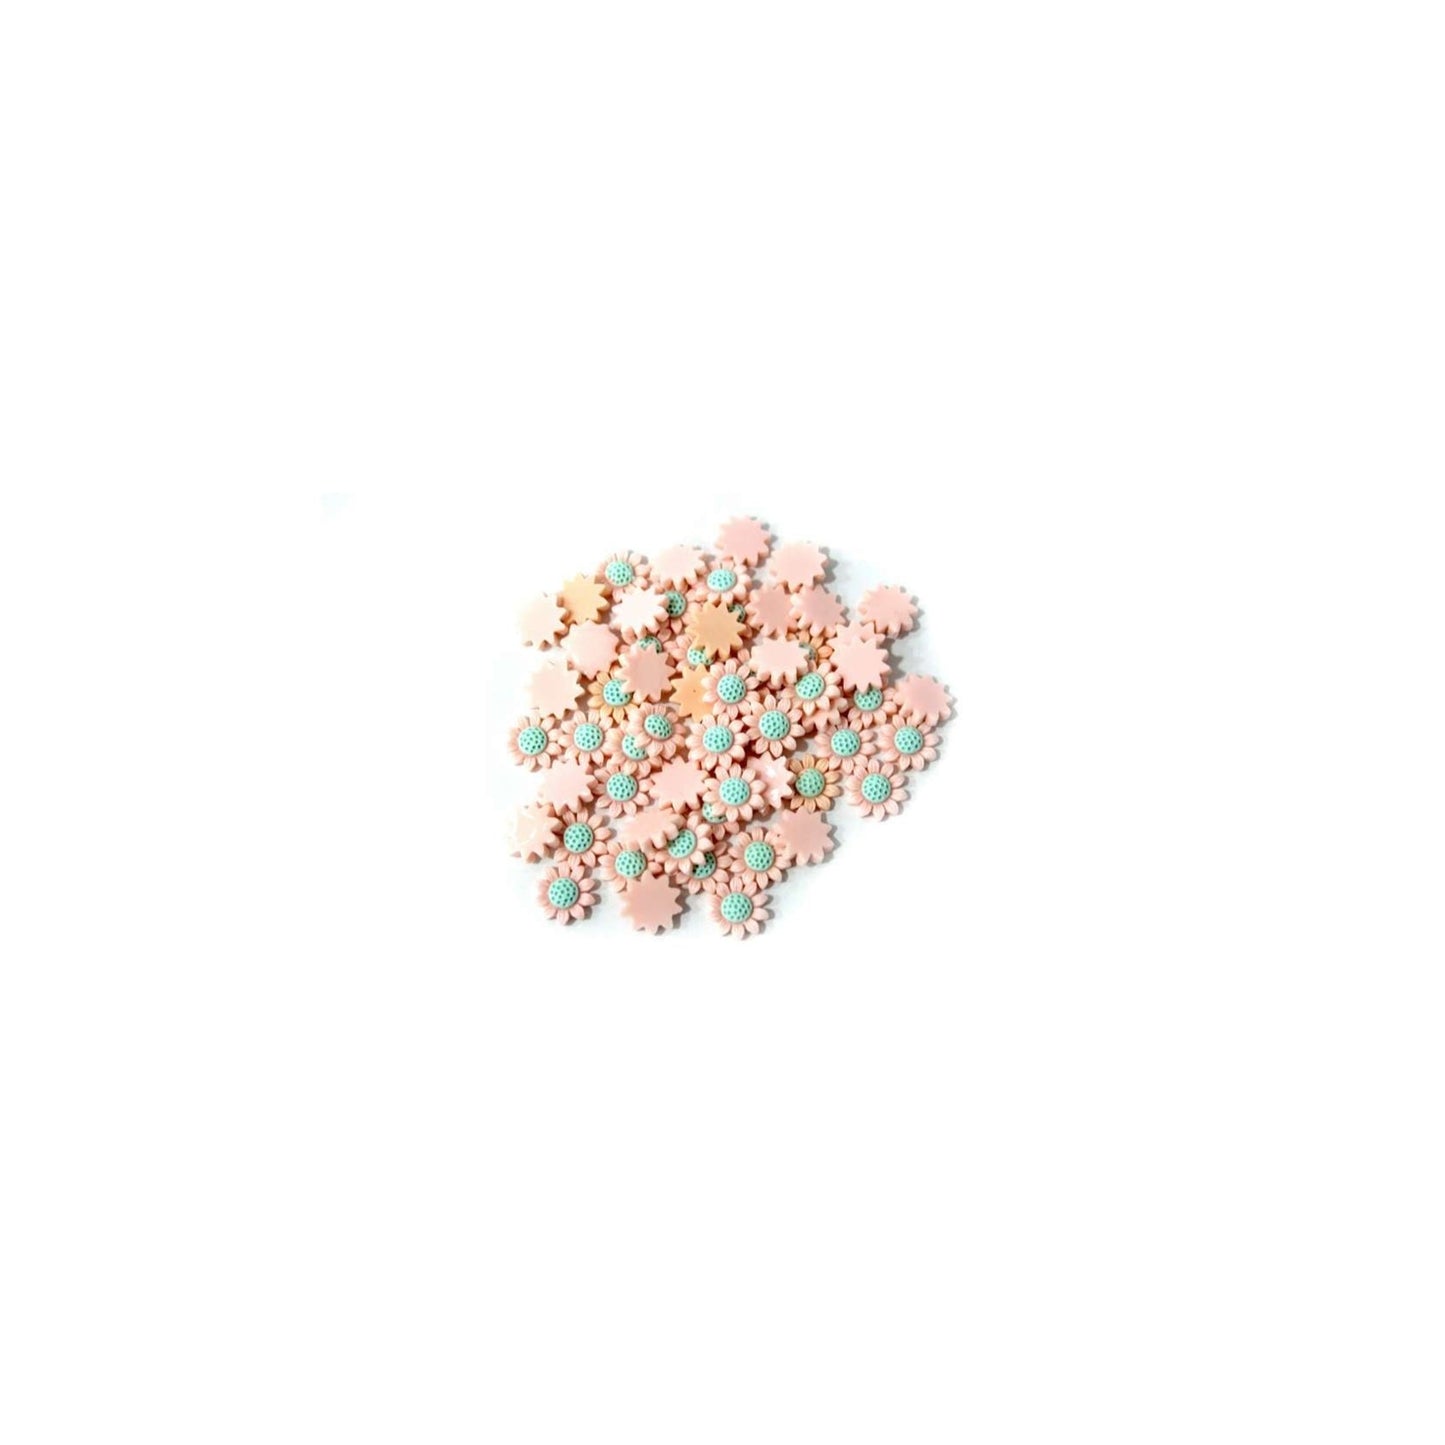 Indian Petals Flat Base 3D Floral Cabochons for Craft Packing or Decoration - 11587, Peach Puff